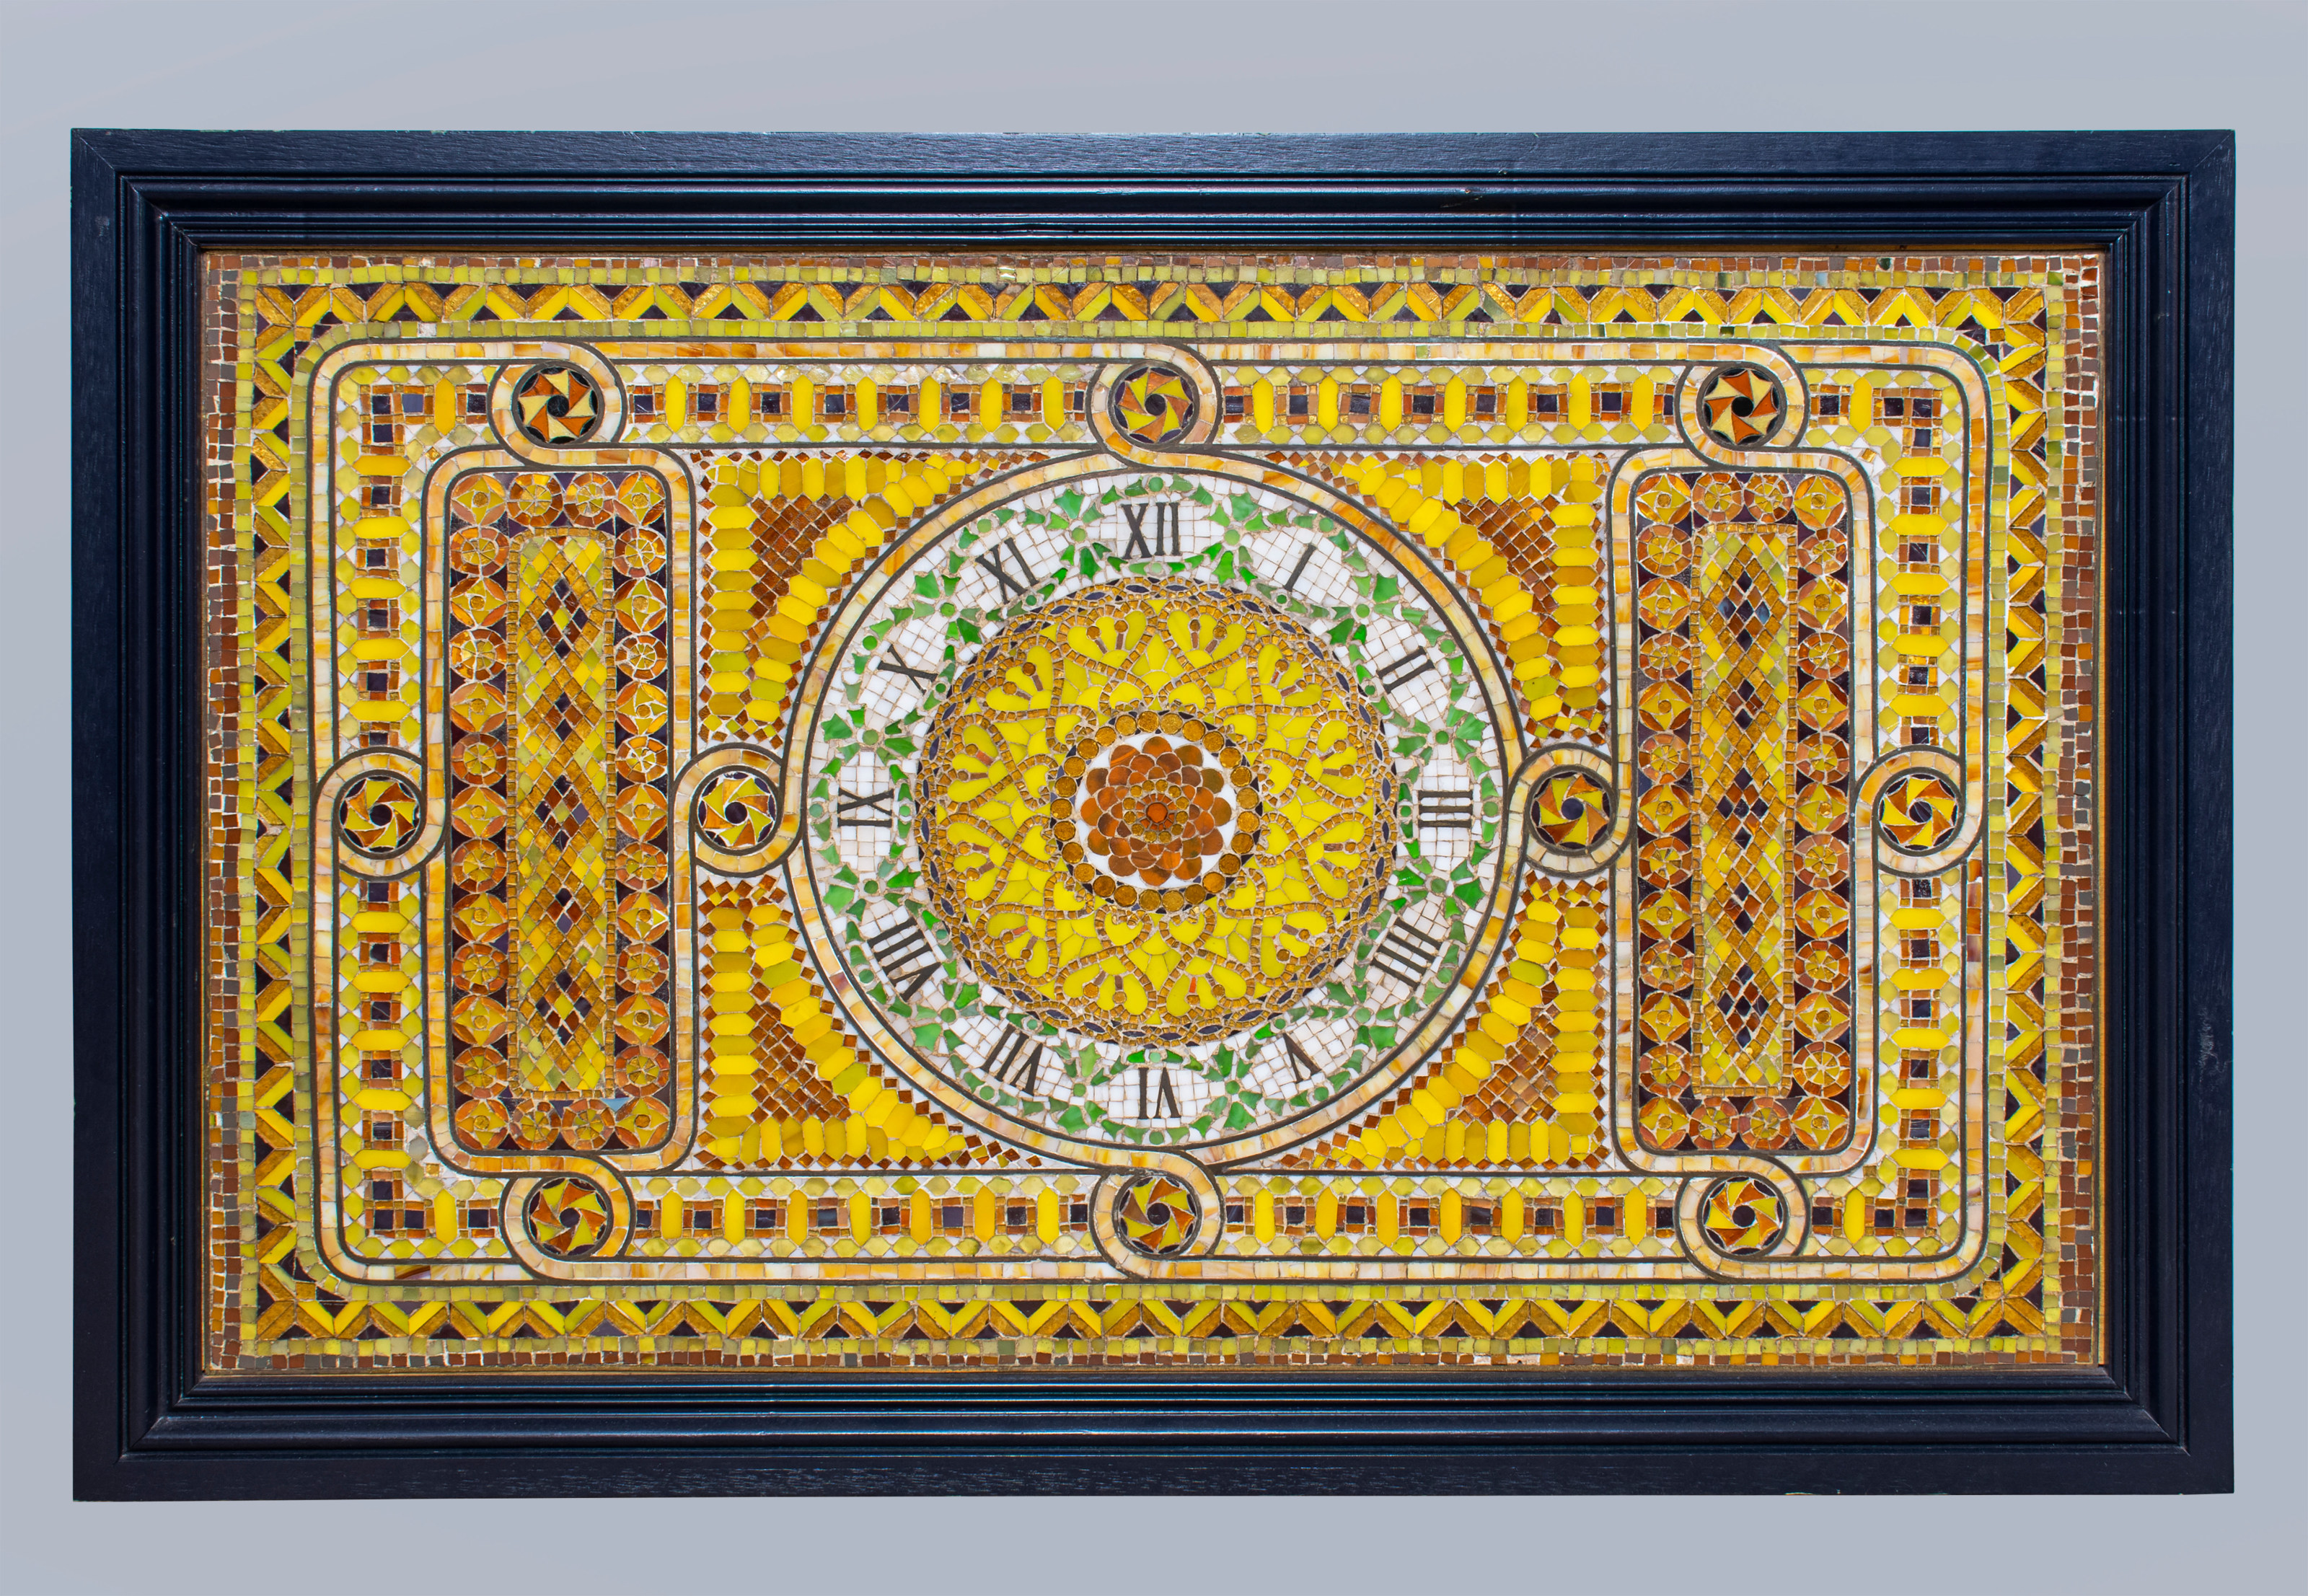 a flat rectangular tiffany favrile glass mosaic panel depicting a clock face in white glass with roman numerals - the background a very bright almost neon yellow glass, decorated in a classical style with geometric scrolls and intricate patterns - there are no clock hands.